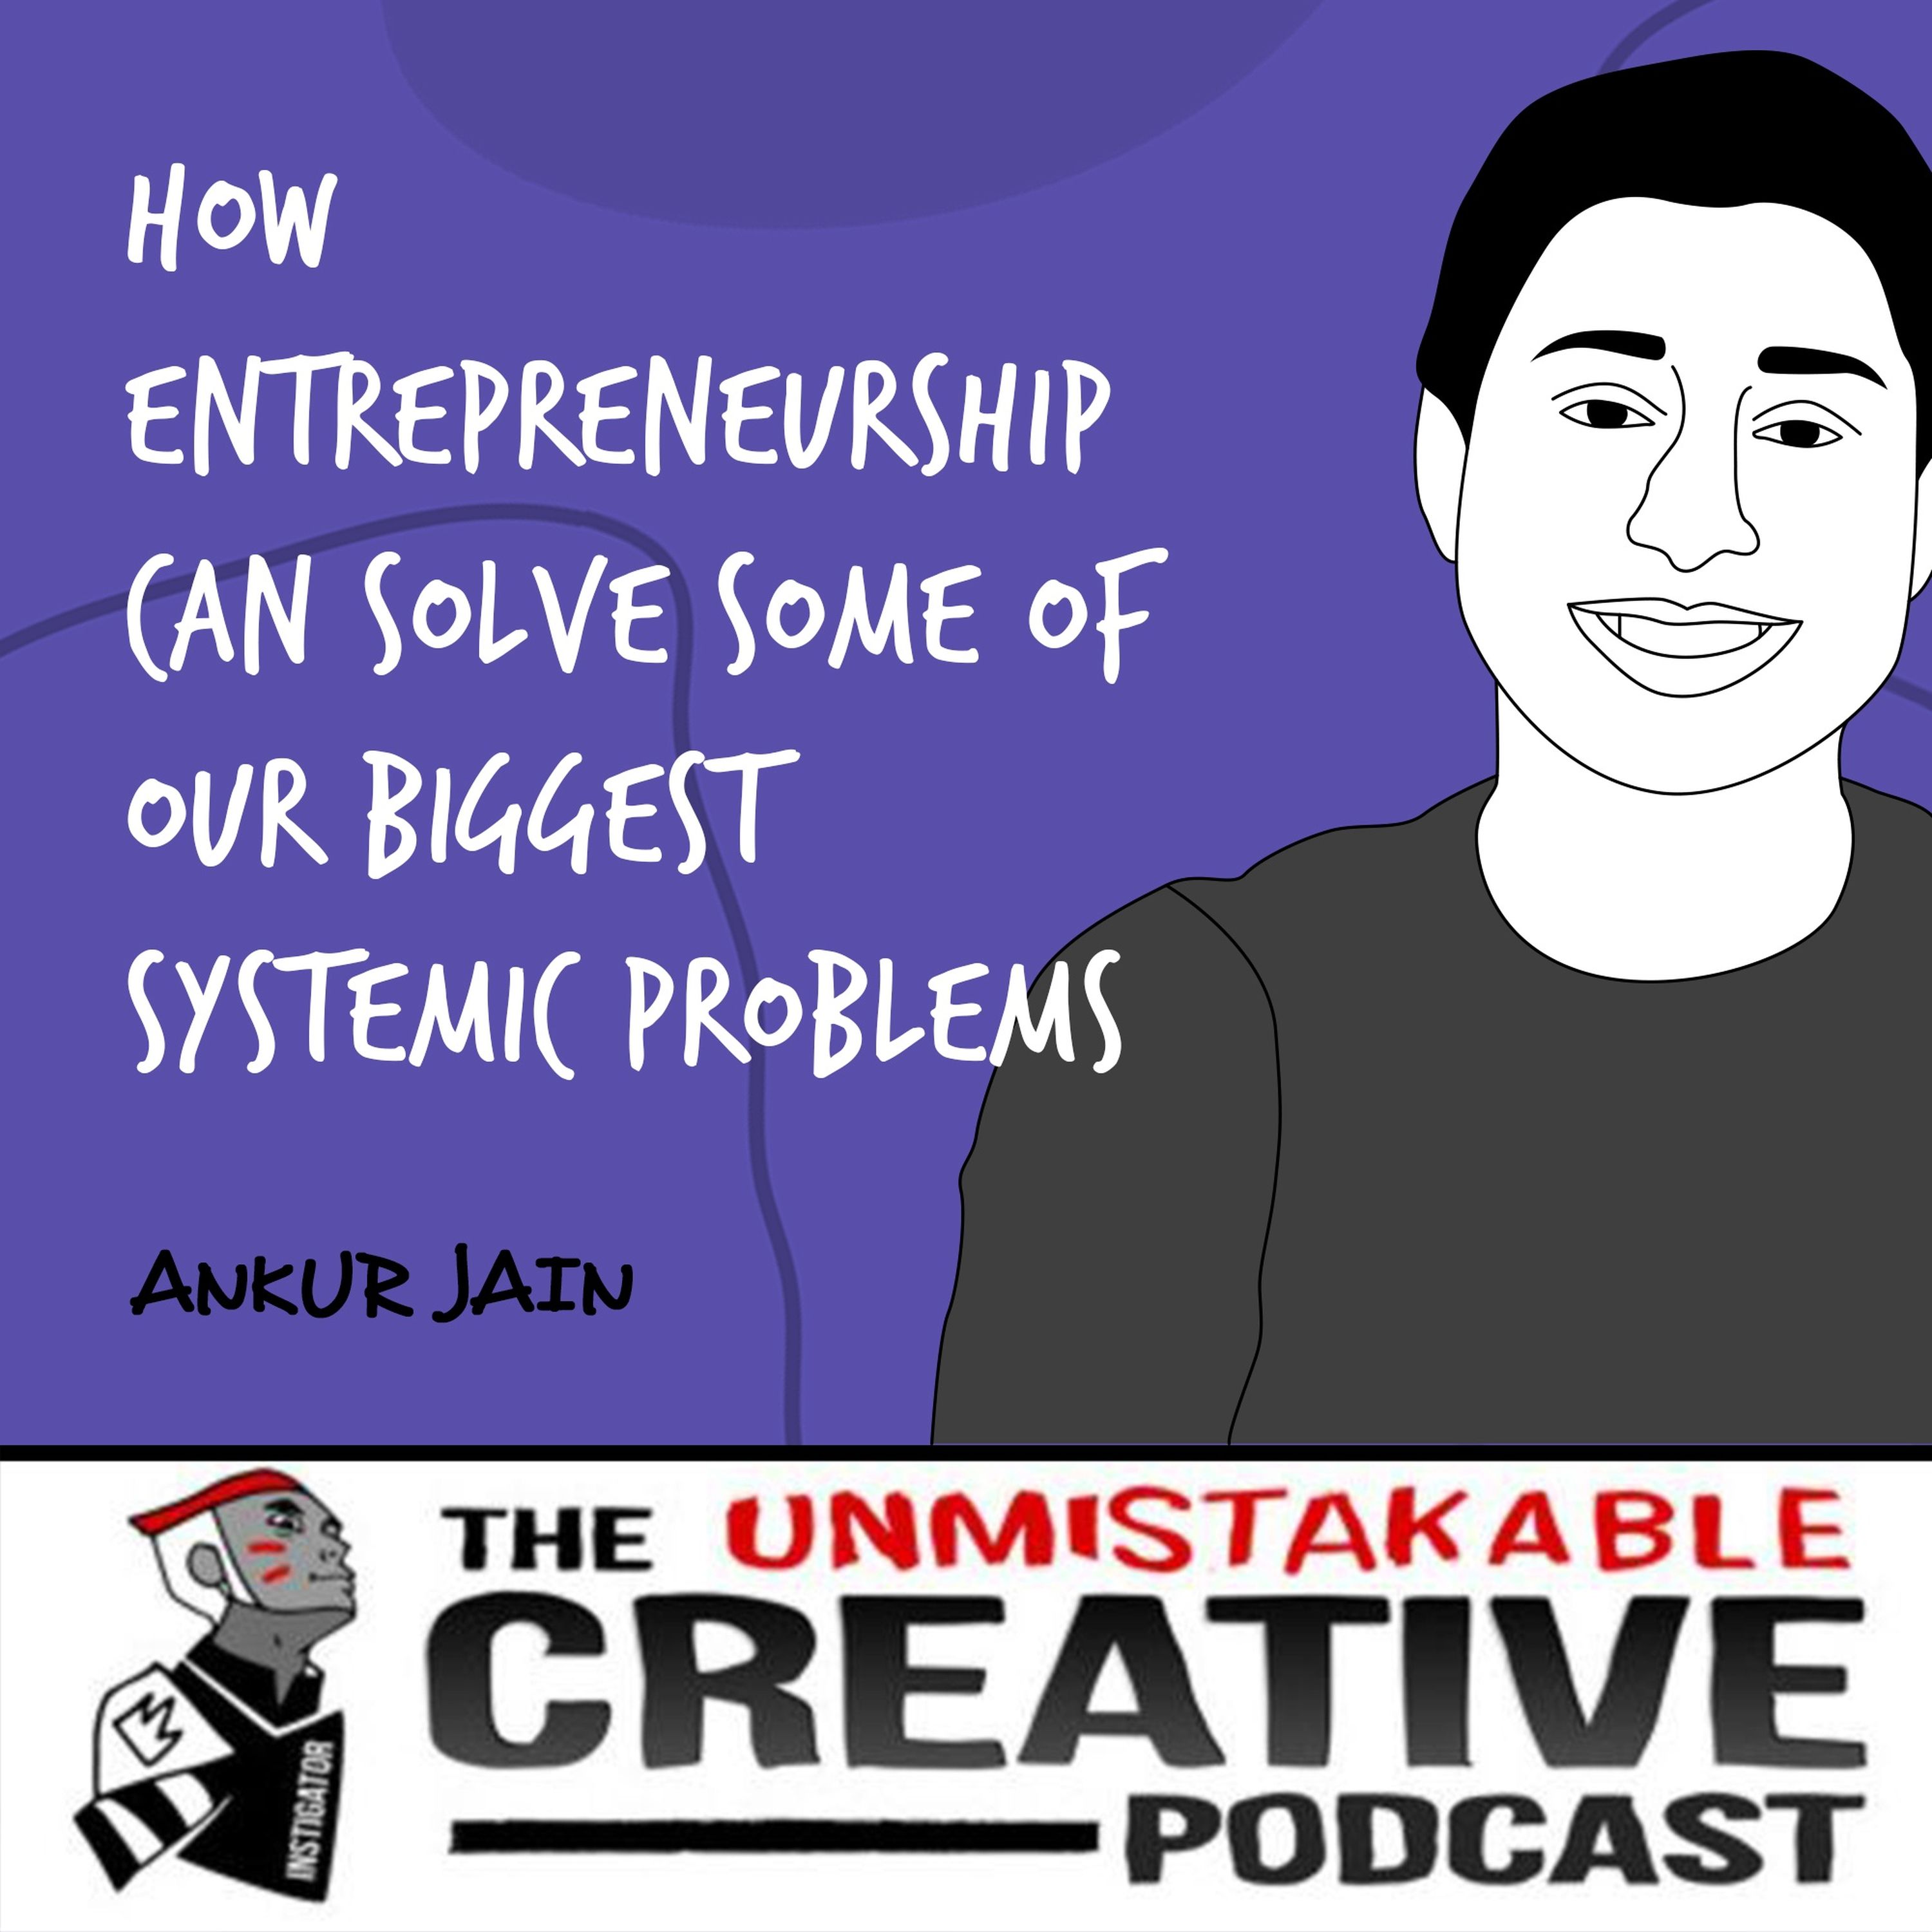 Ankur Jain | How Entrepreneurship Can Solve Some Of Our Biggest Systemic Problems Image